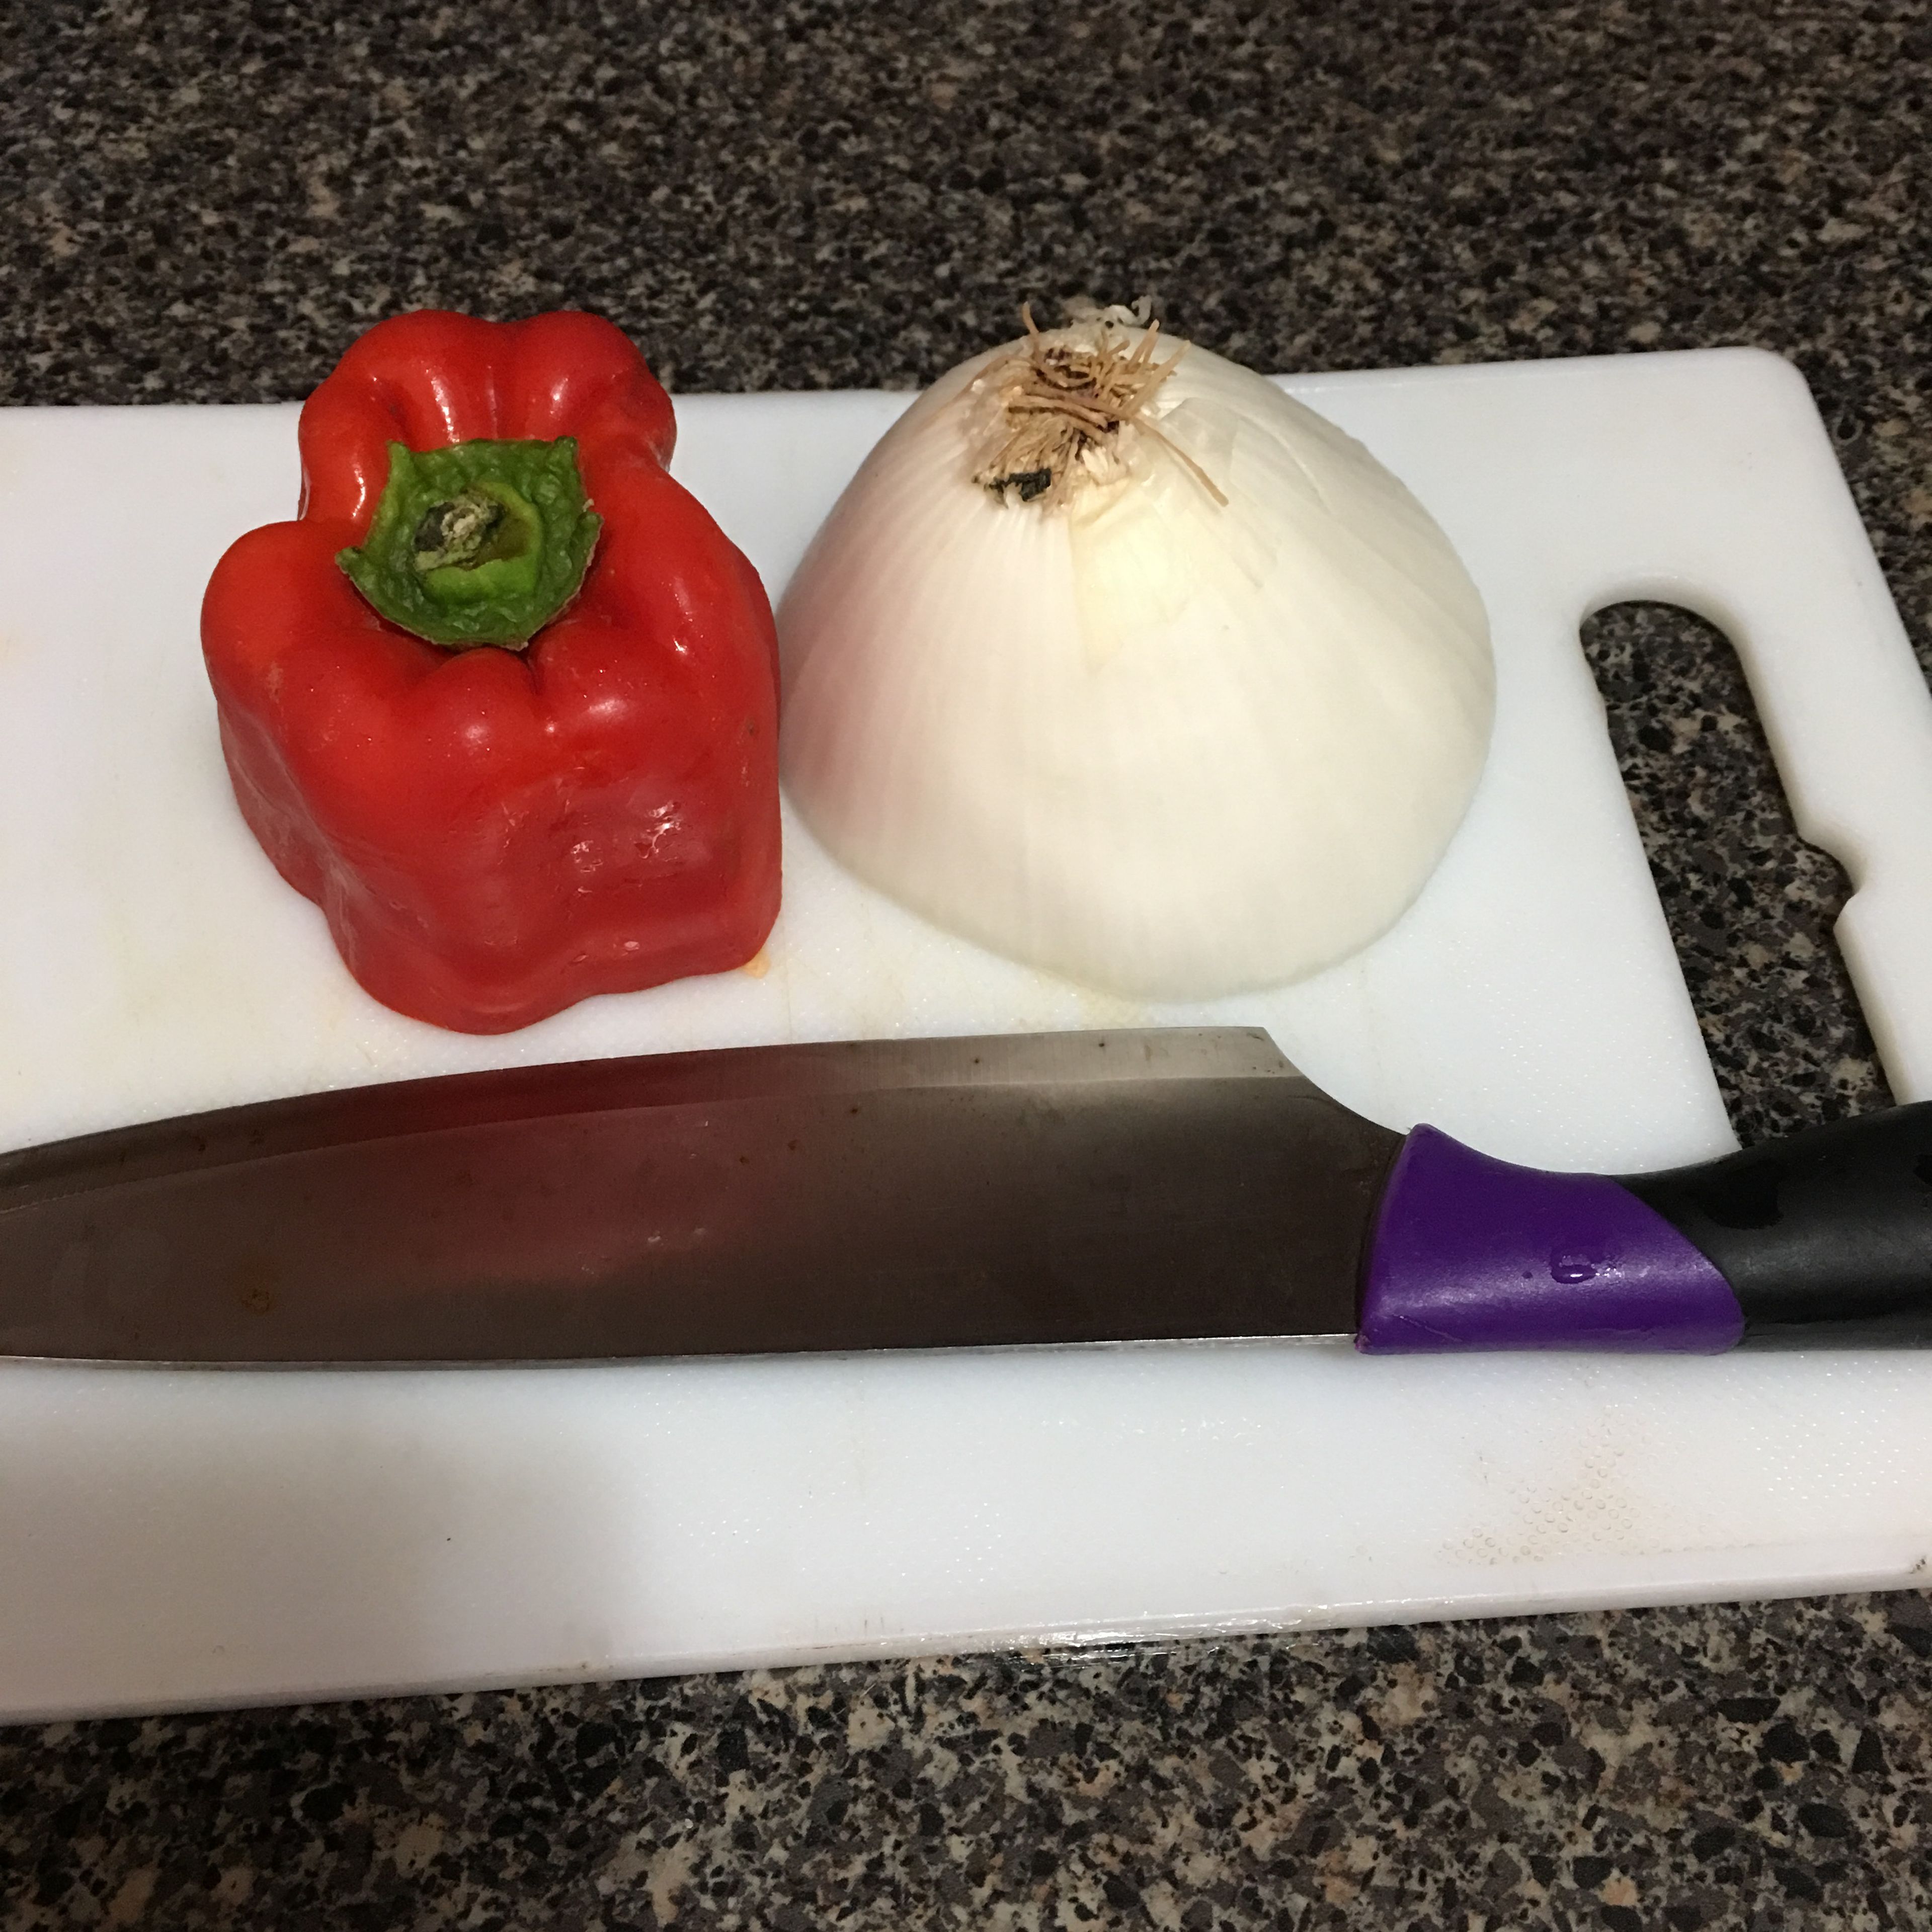 While the meat is resting and getting all of those flavors together, with a knife lets proceed to shop our white onion and our red bell pepper (you can use more than 1 color of bell pepper, I’m using the red one because of it sweet taste, and because it was the one I had on hand for this “under budget fajitas”